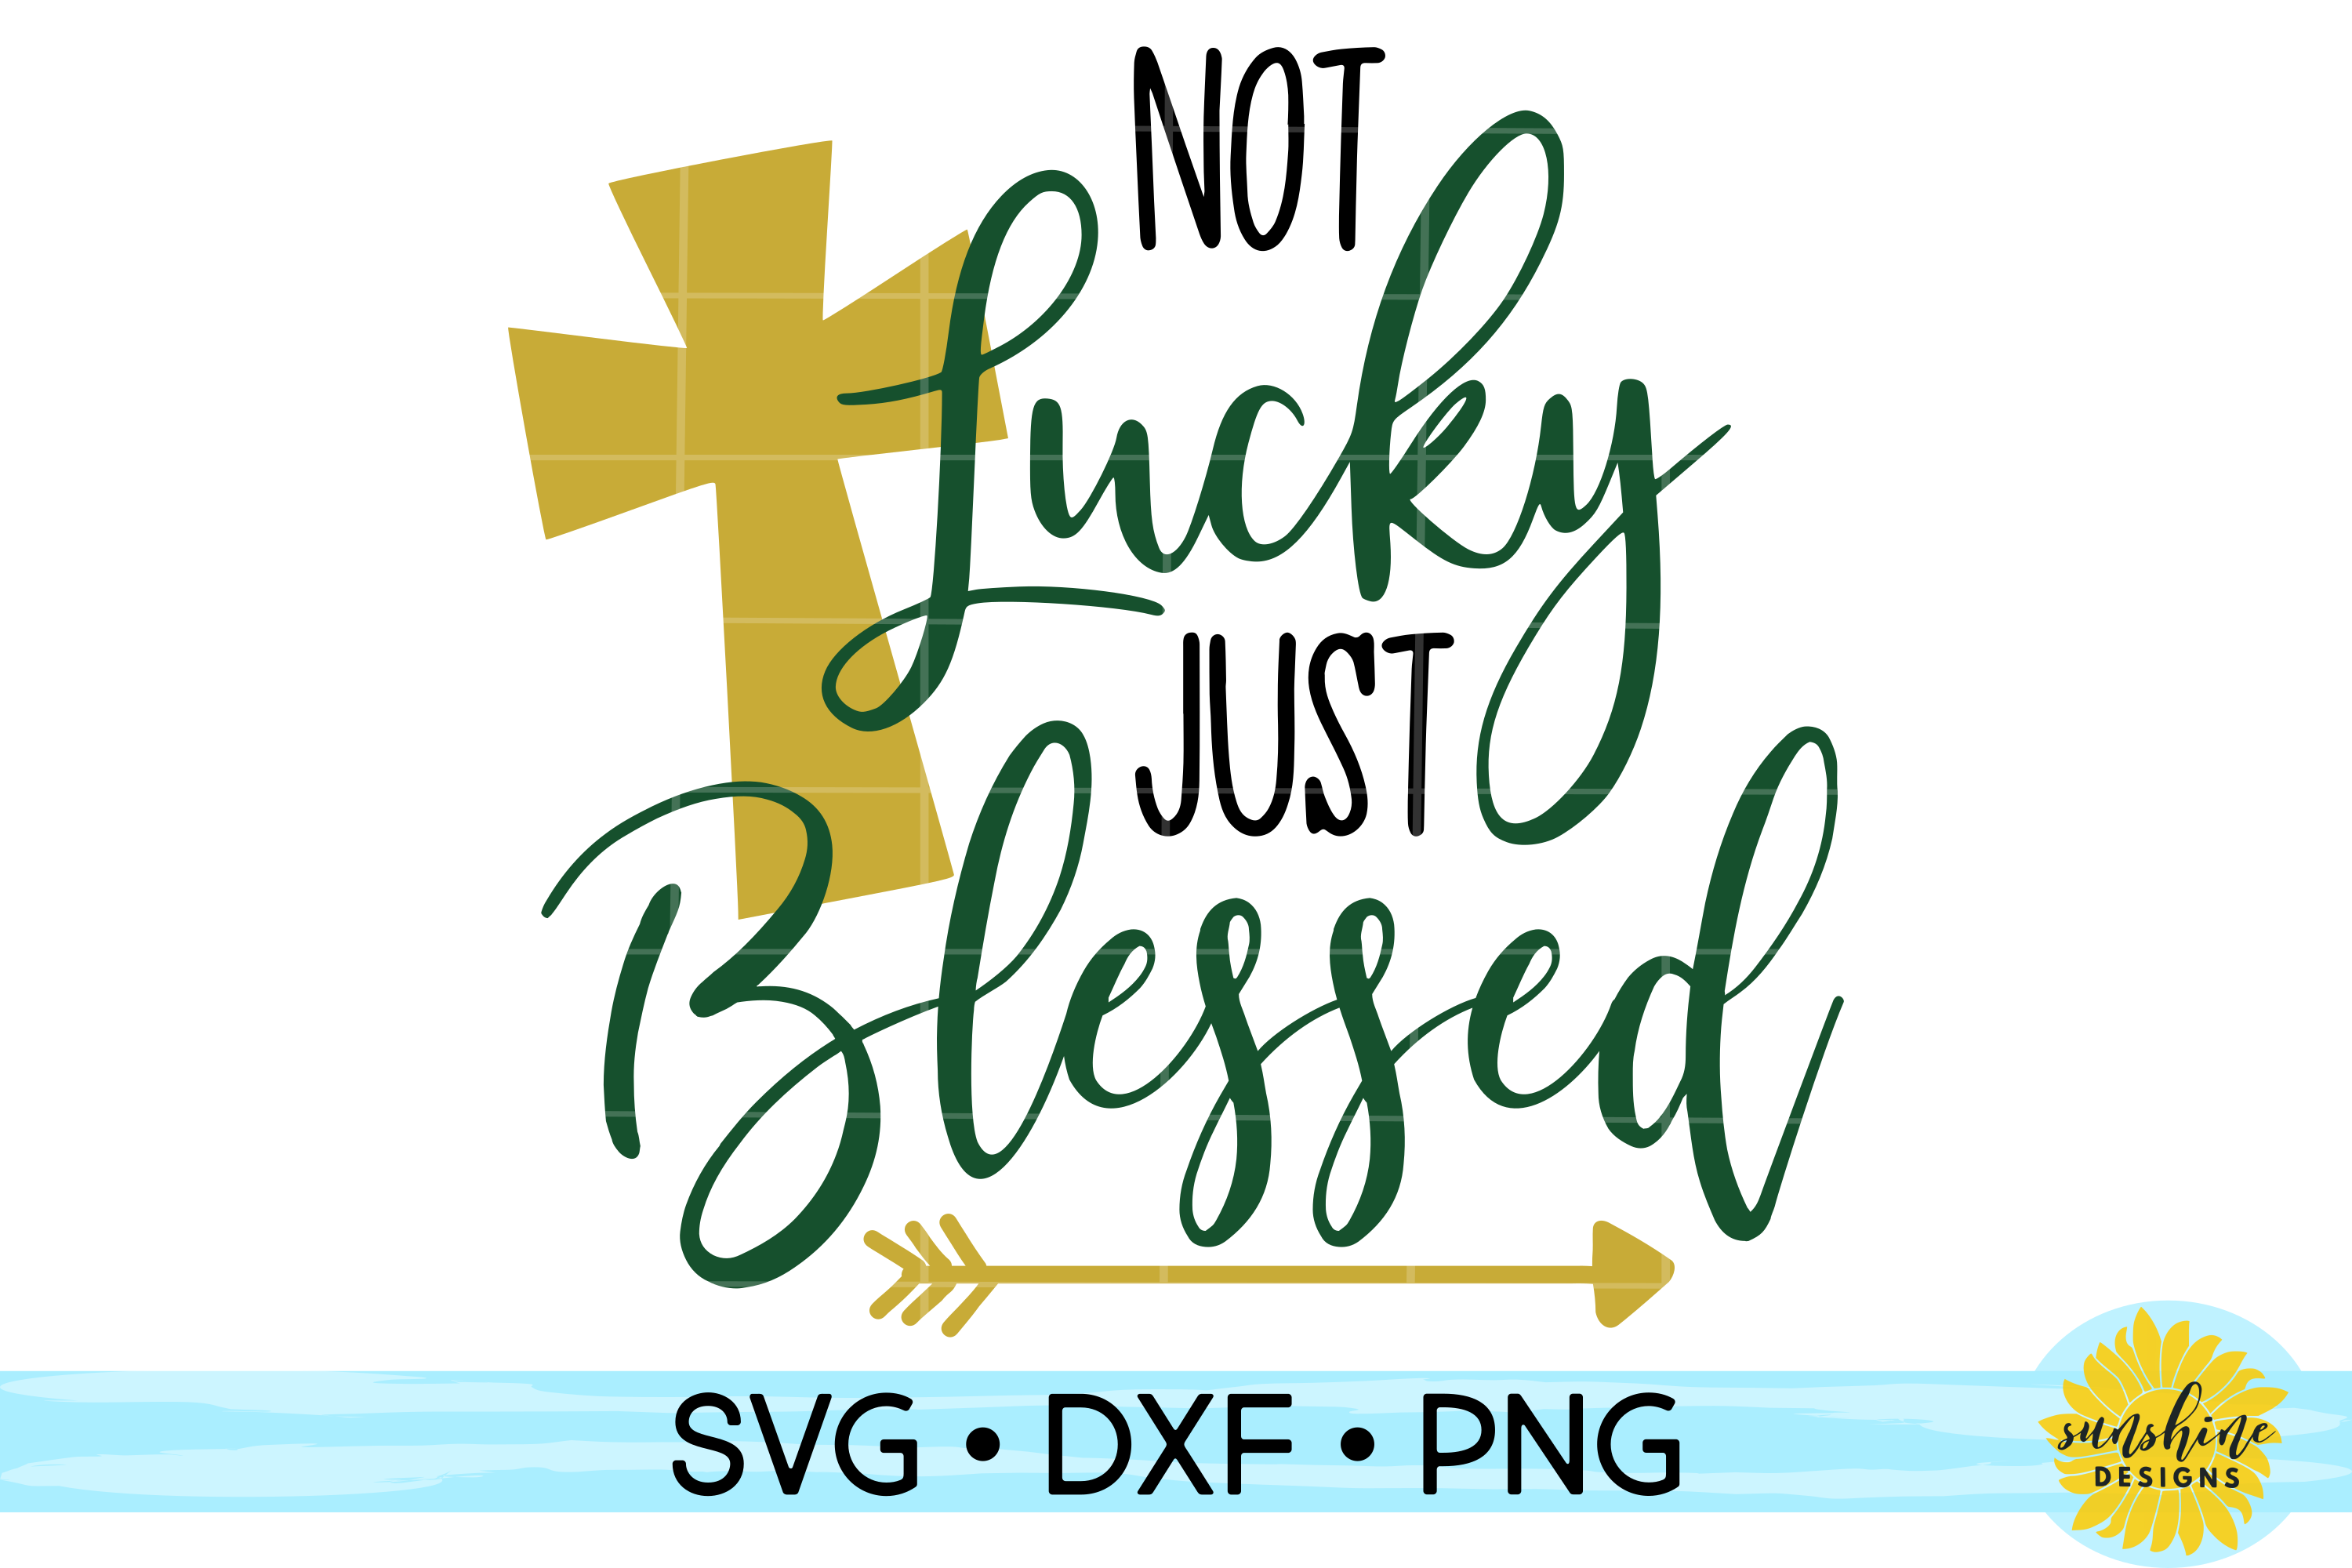 Download Not Lucky Just Blessed| St. Patricks Day SVG DXF PNG